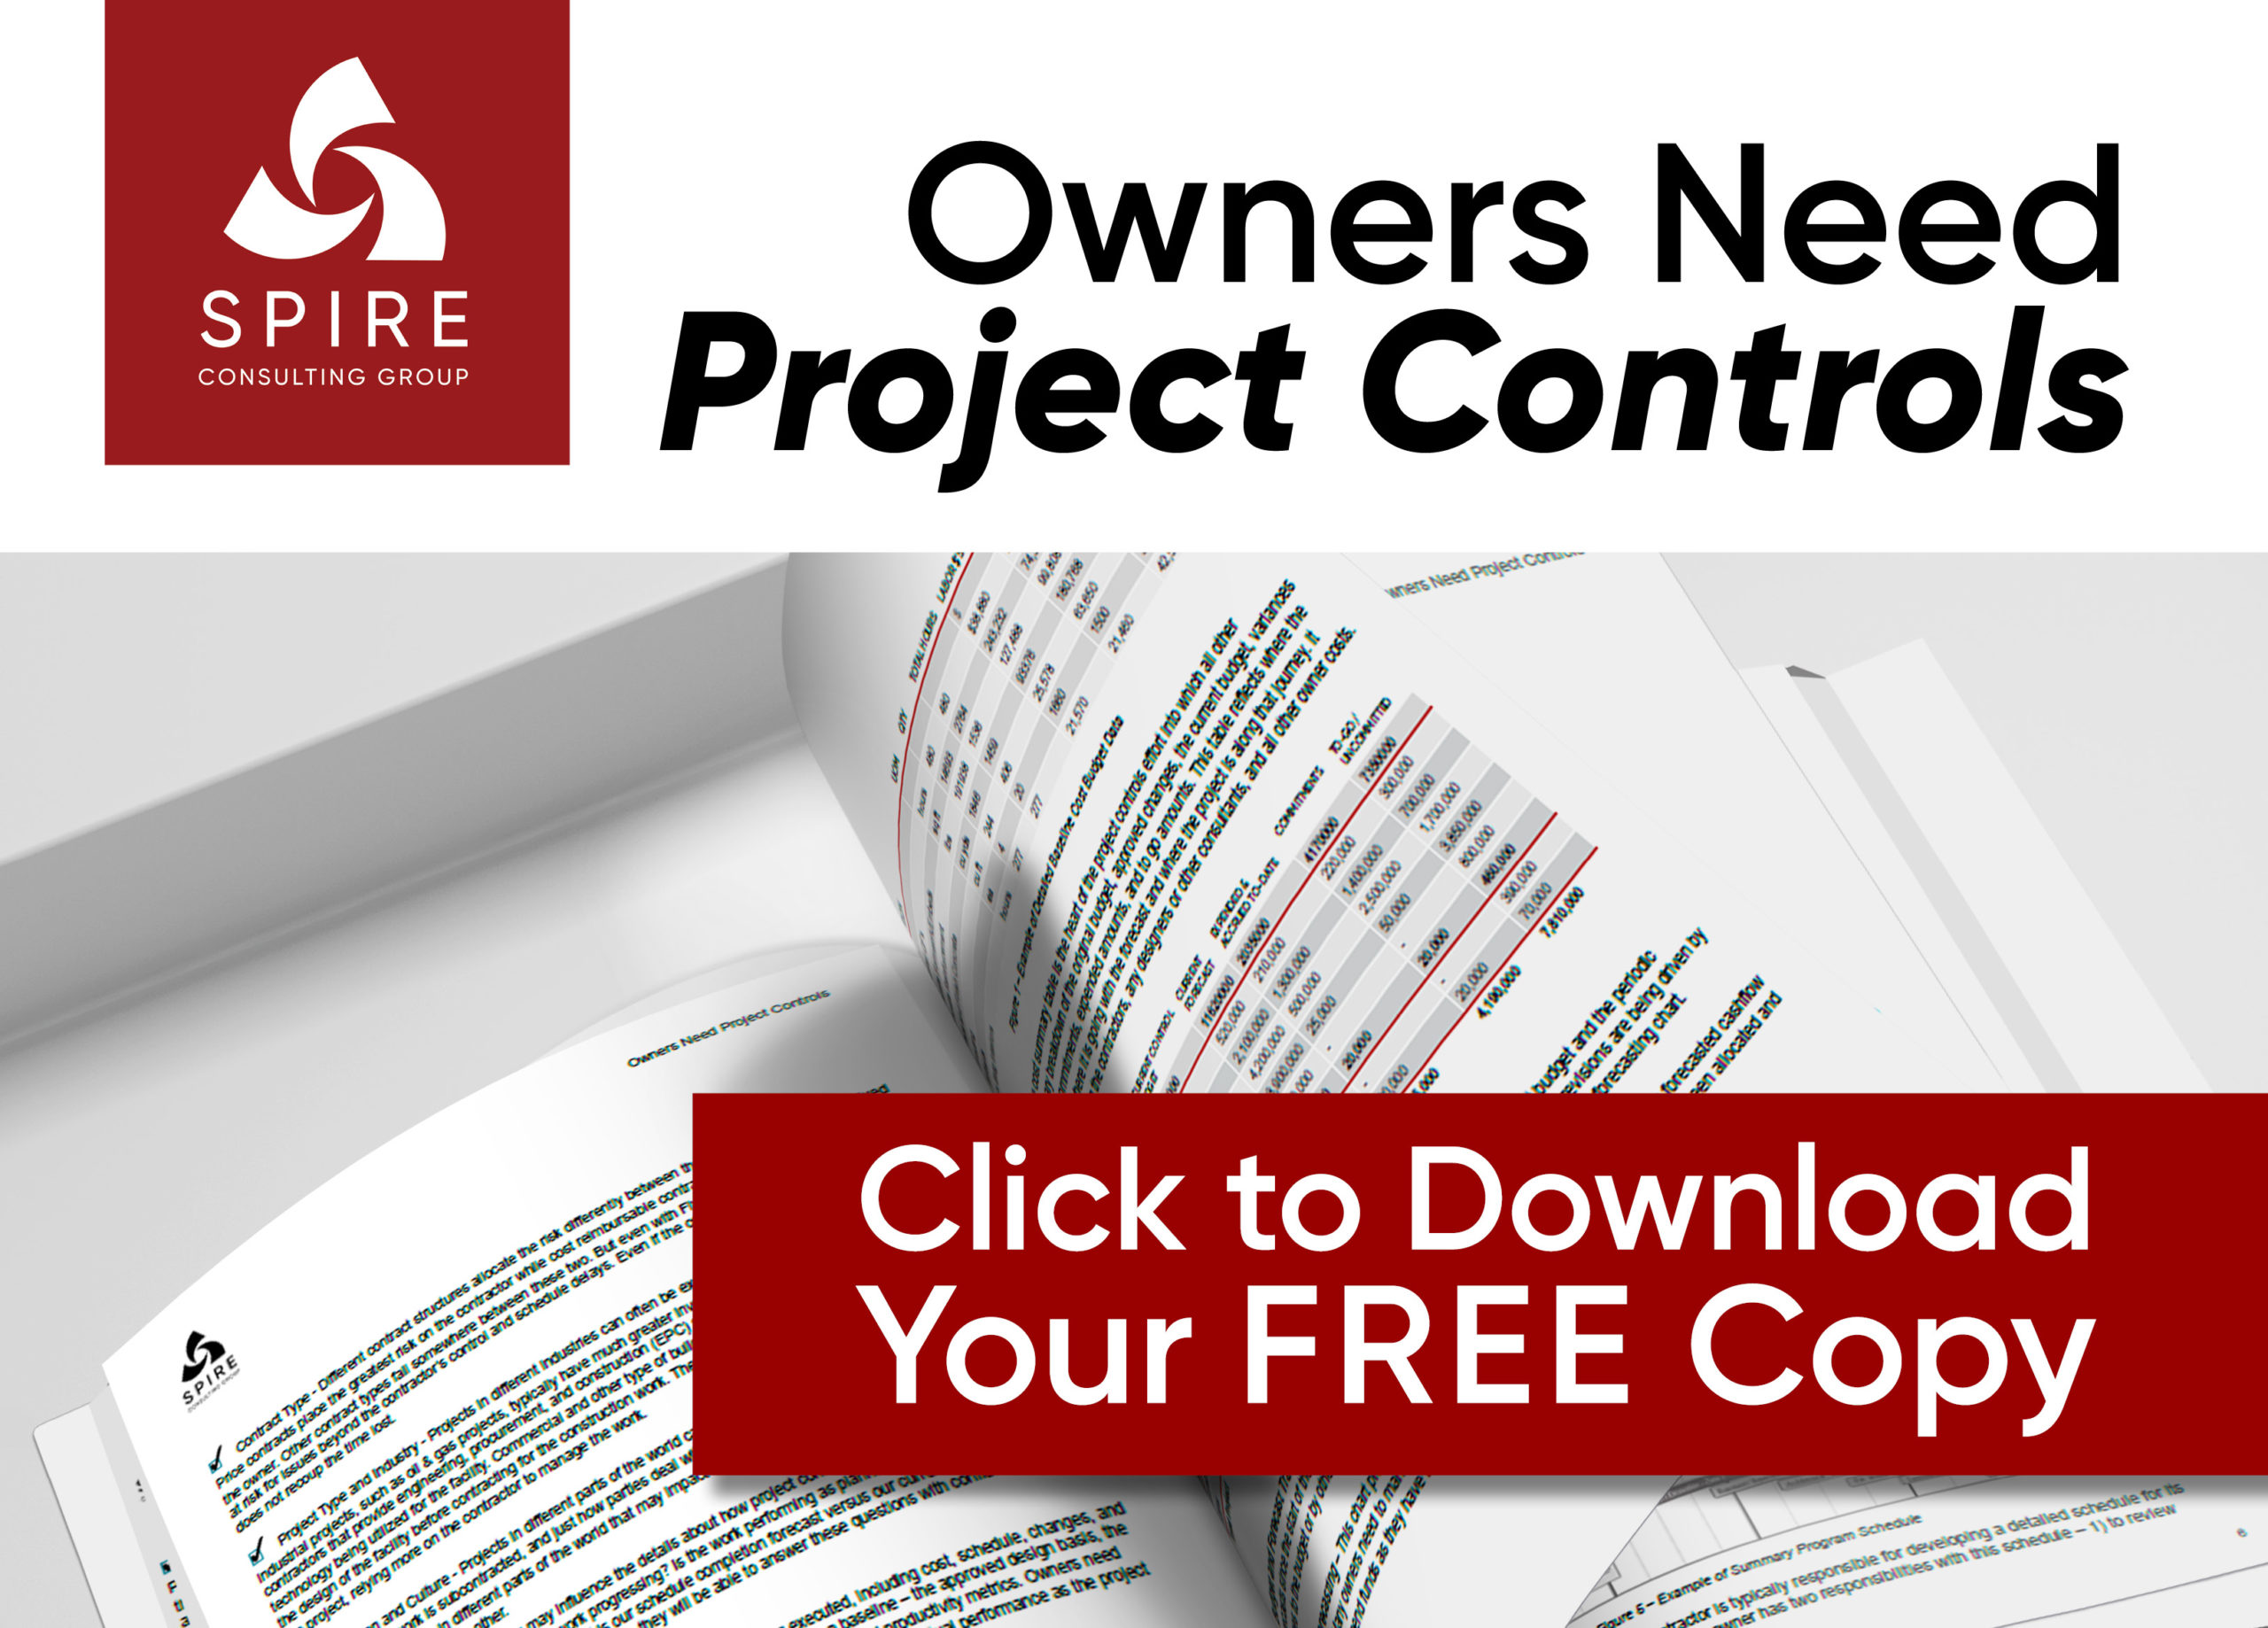 Owners Need Project Controls